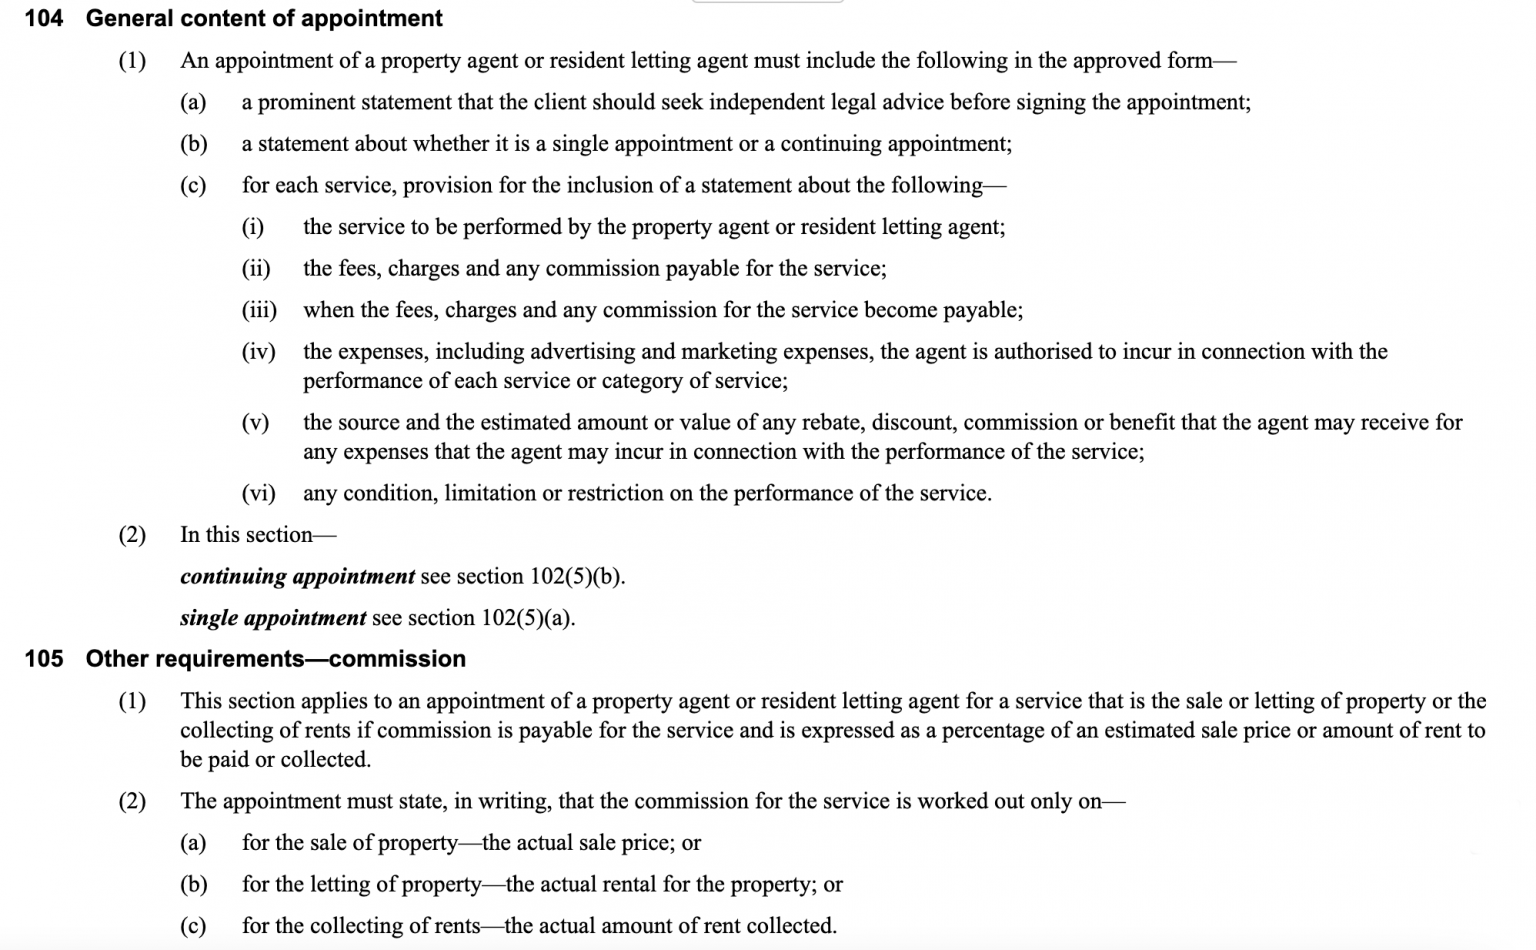 Section 104/105 of the PO Act